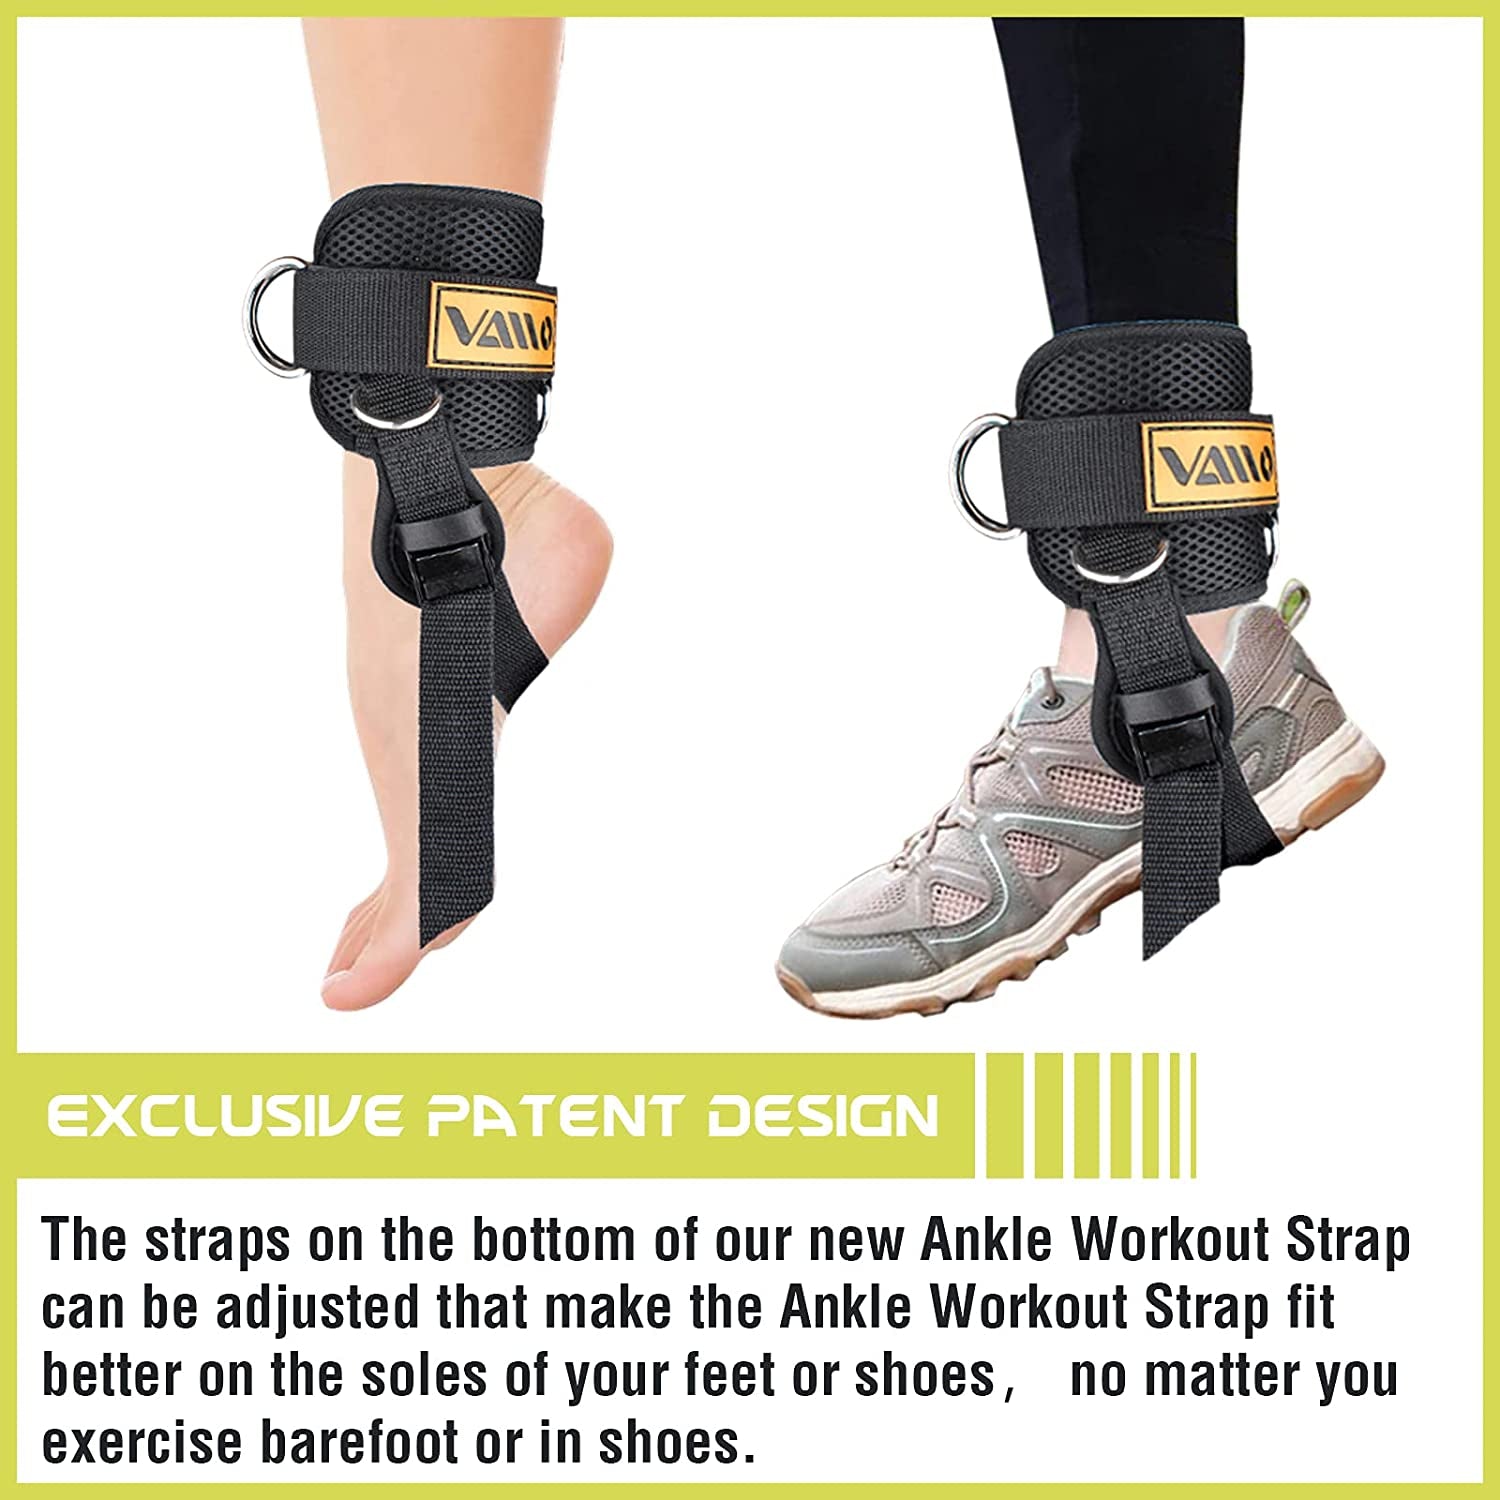 Adjustable Neoprene Ankle Straps for Cable Machines - Ideal for Kickbacks, Glute Workouts, and Lower Body Exercises - Enhance Leg Tone - Suitable for Both Men and Women - Sold as a Pair